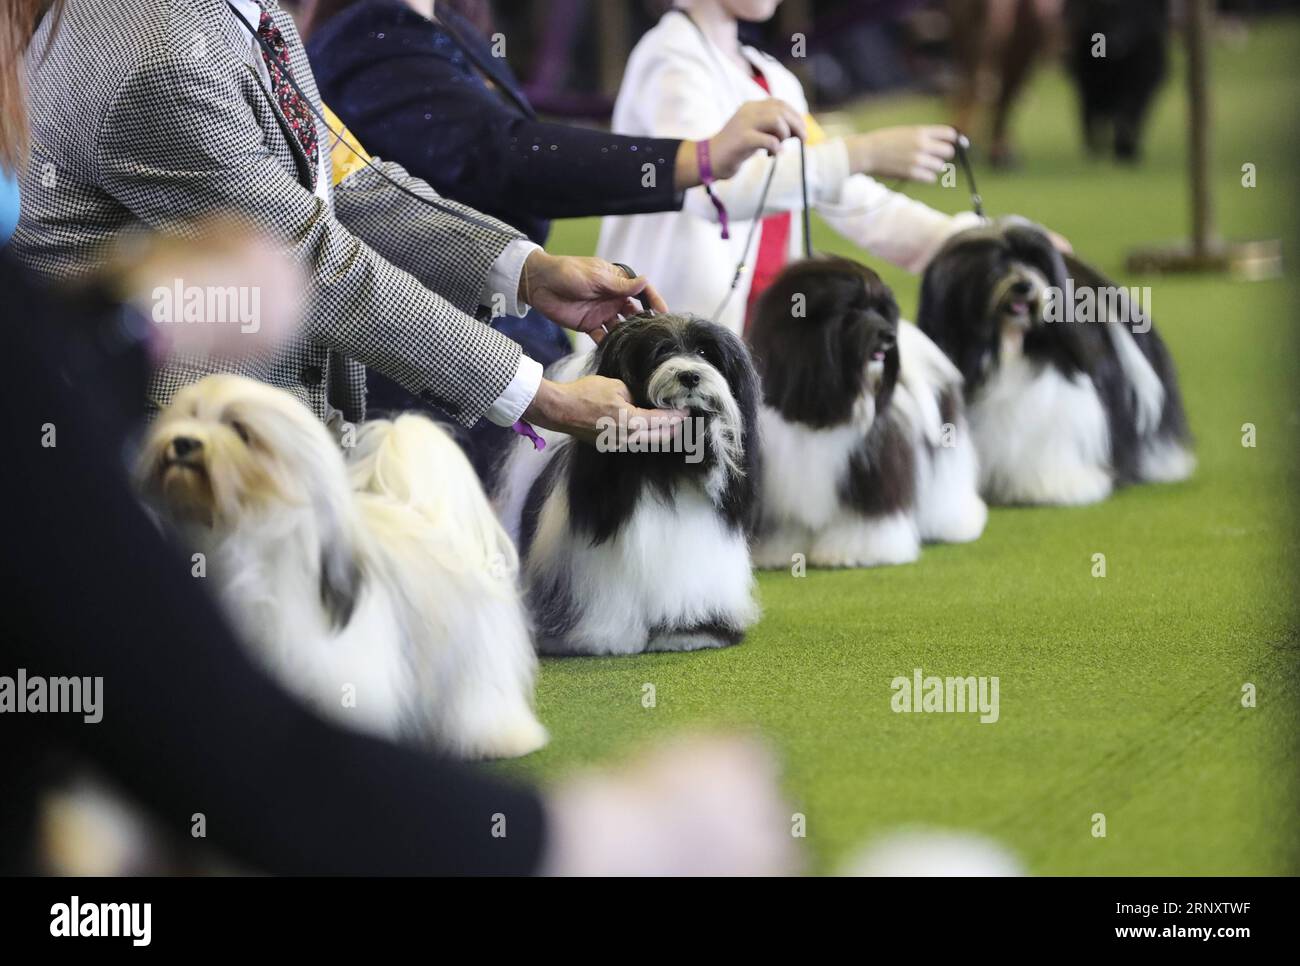 (180213) -- NEW YORK, Feb. 13, 2018 -- Havanese dogs are seen during the 2018 Westminster Kennel Club Dog Show in New York, the United States, Feb. 12, 2018. Around 2800 dogs of over 200 breeds from all over the world participated in the show this year. ) (zy) U.S.-NEW YORK-DOG SHOW WangxYing PUBLICATIONxNOTxINxCHN Stock Photo